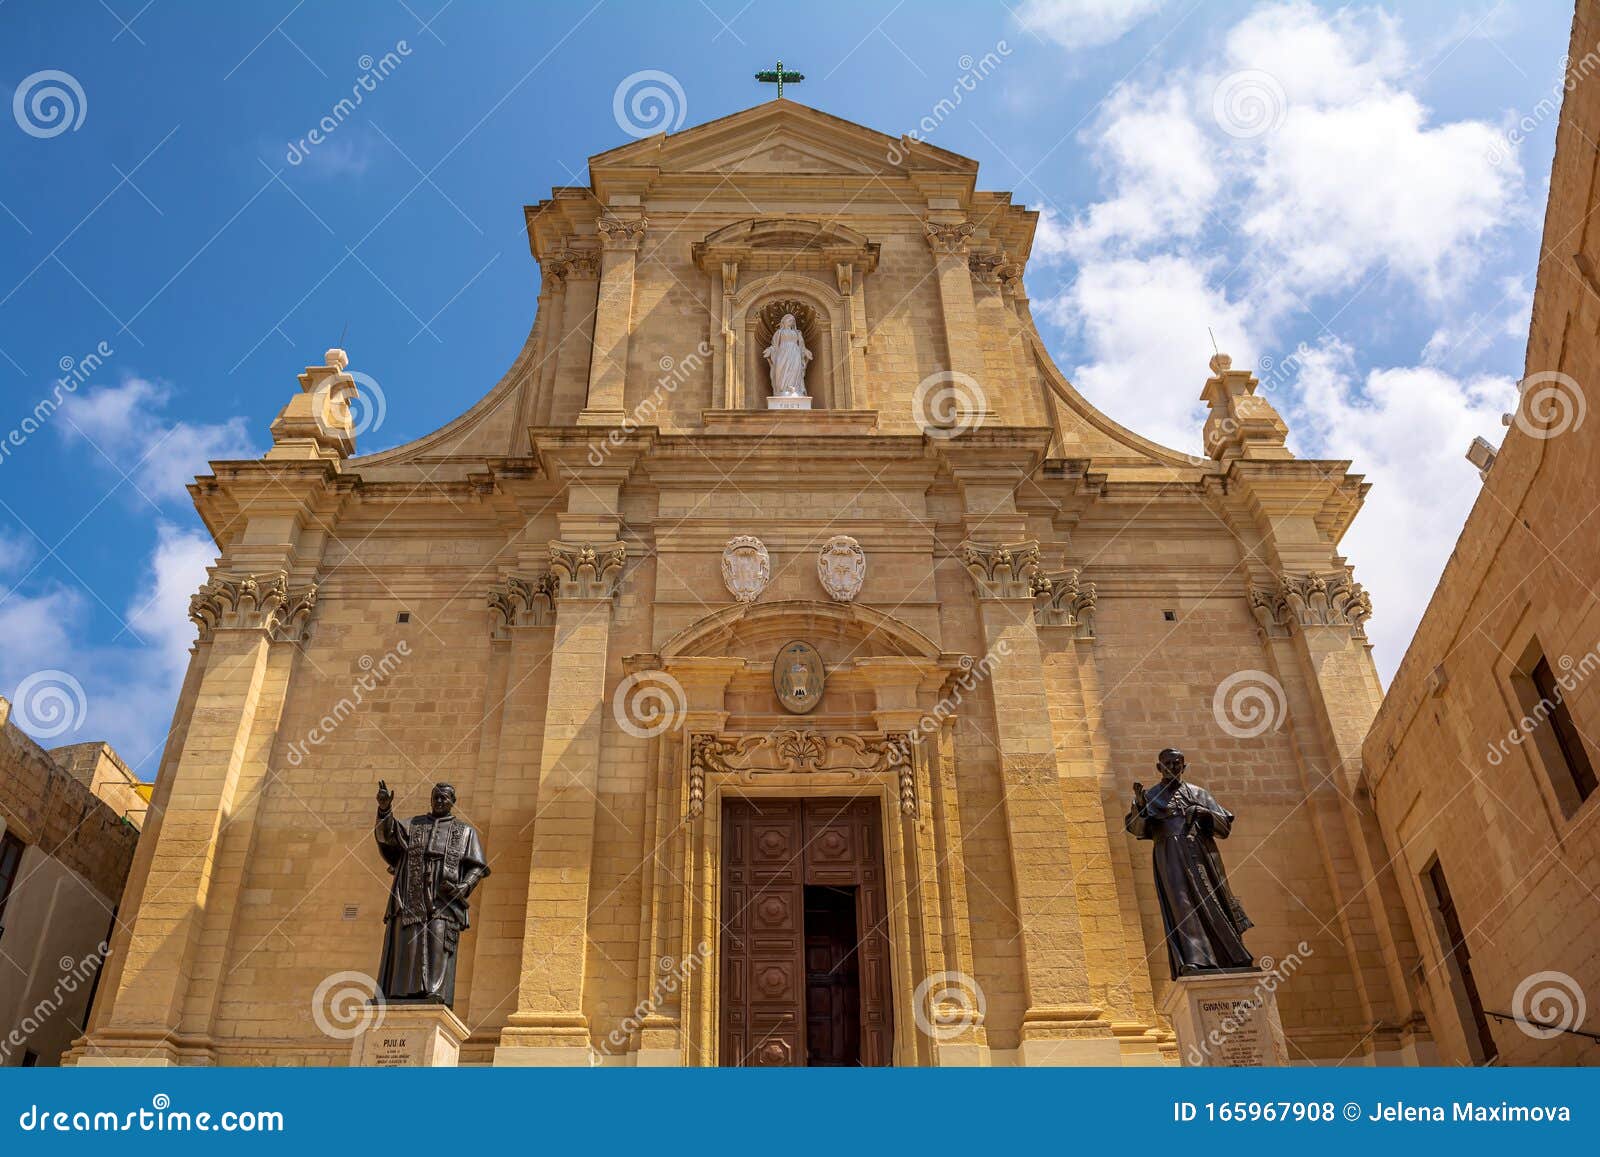 Facade Of The Cathedral Of The Assumption In The ...